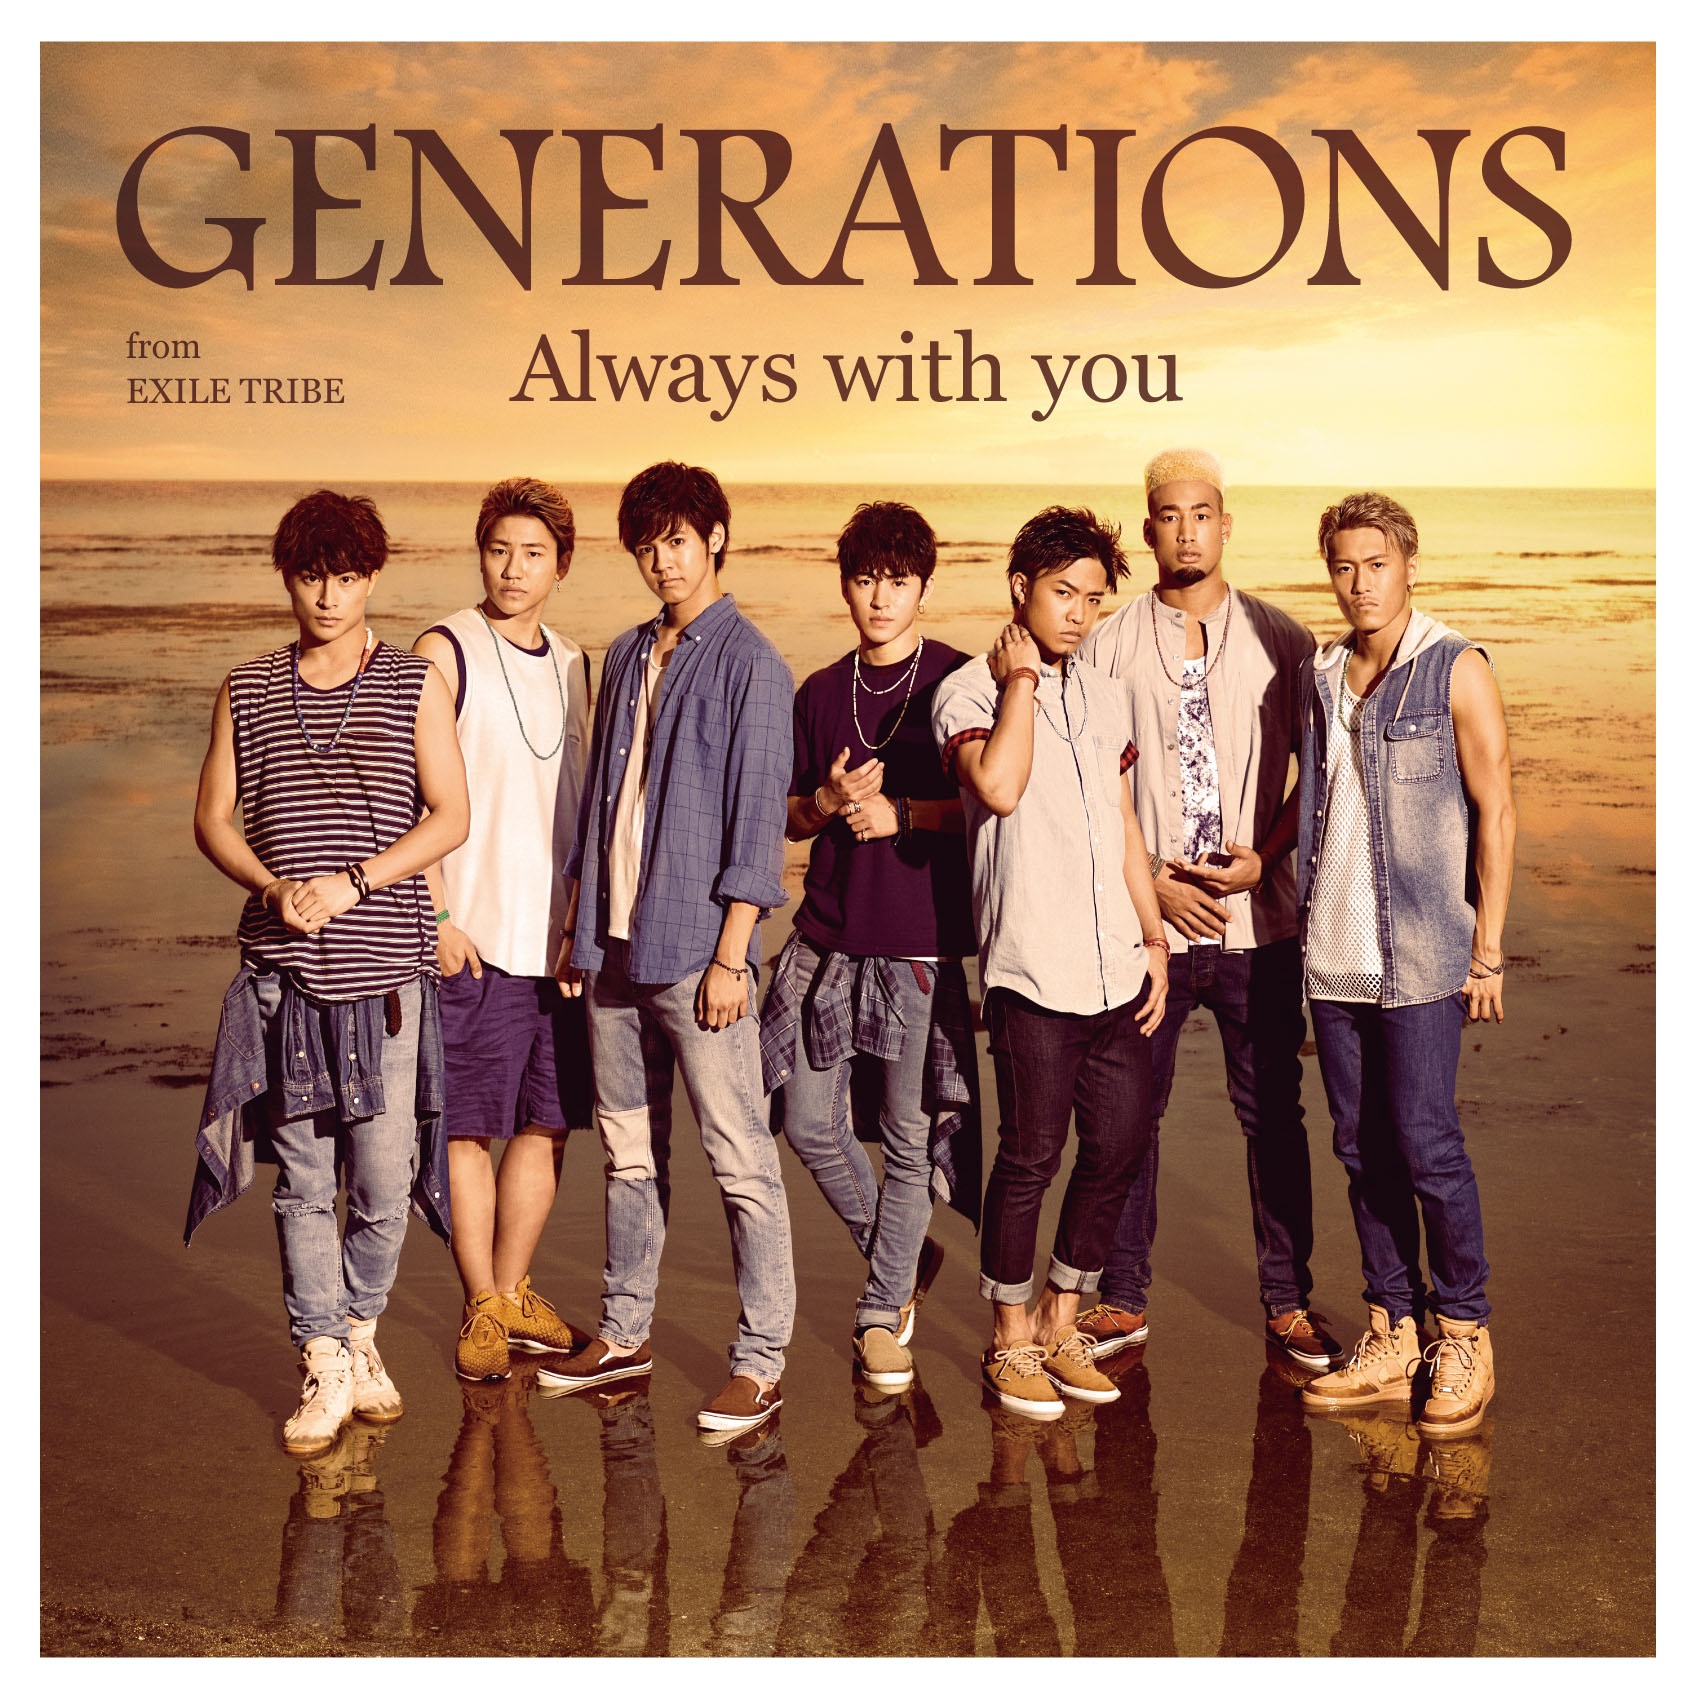 Always With You(GENERATIONS from EXILE TRIBE演唱歌曲)